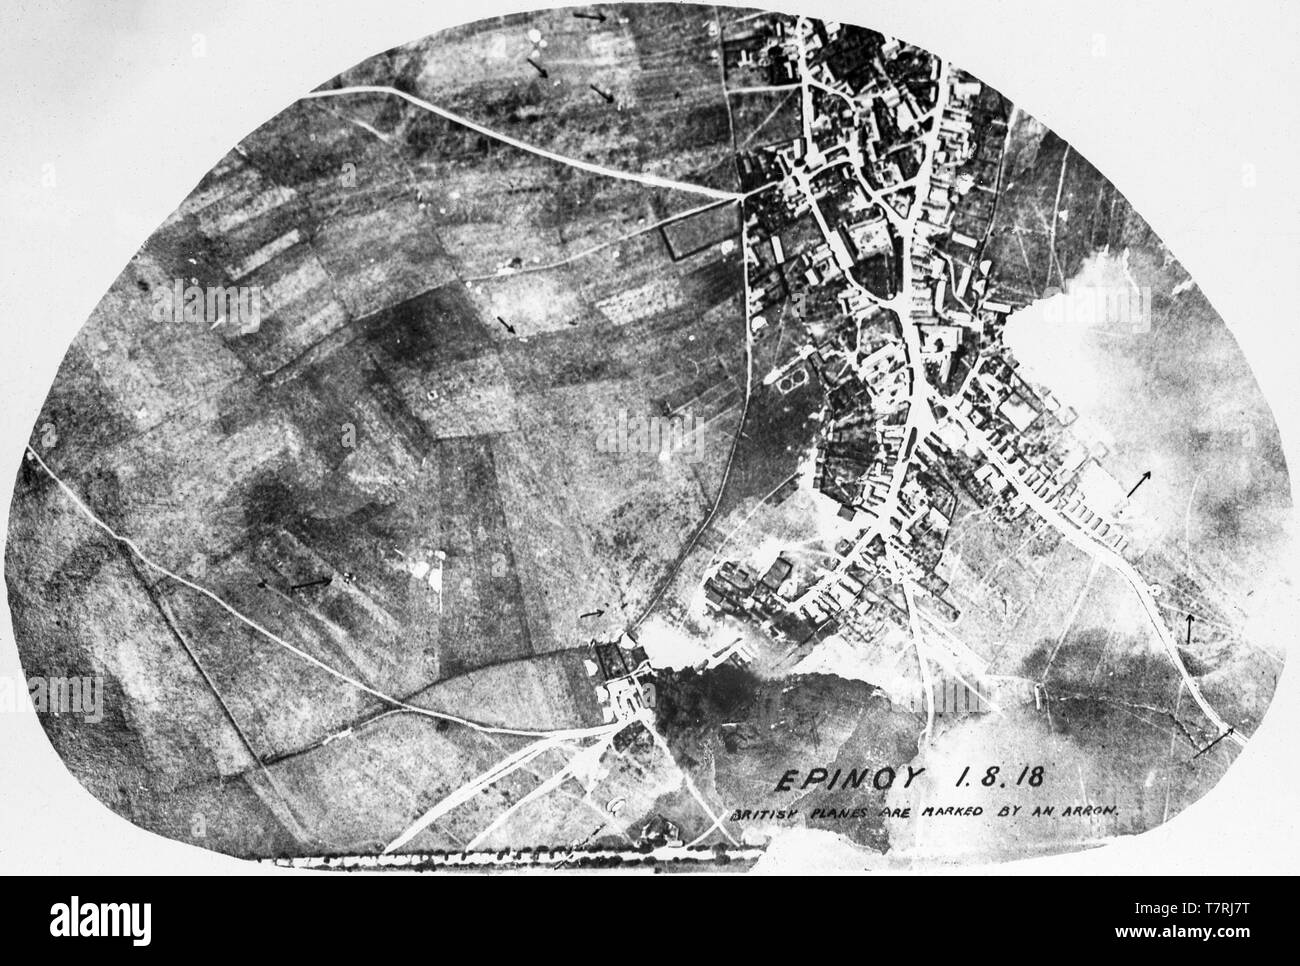 A contemporary British black and white aerial photograph showing  bombing of the town of Epinoy in Northern France on 1st August 1918. A number of British aircraft have been marked with arrows on the photograph. Stock Photo